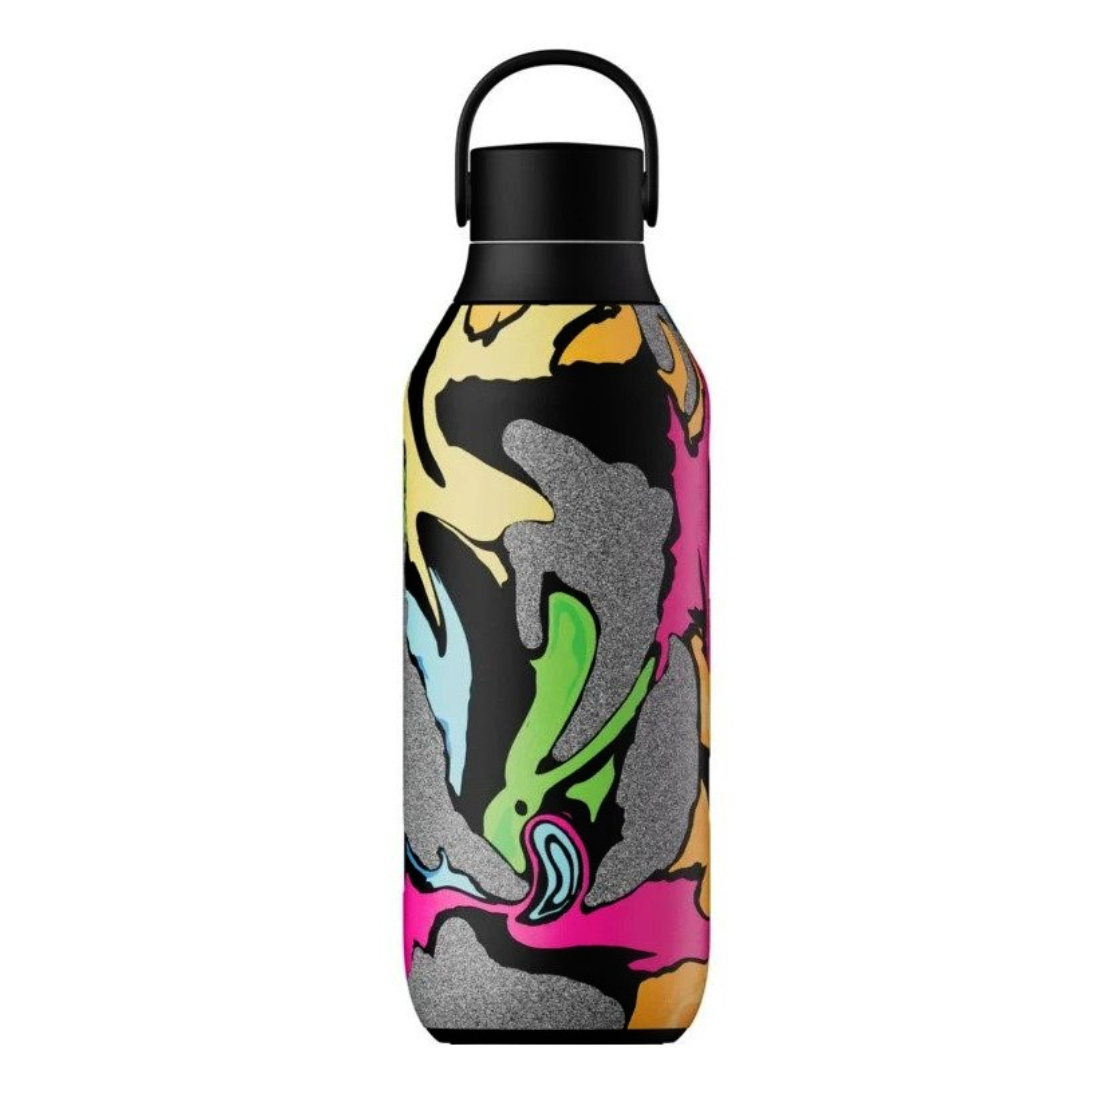 20230607154842_chilly_s_series_2_mpoukali_thermos_studio_go_with_the_flow_500ml_22621.jpeg